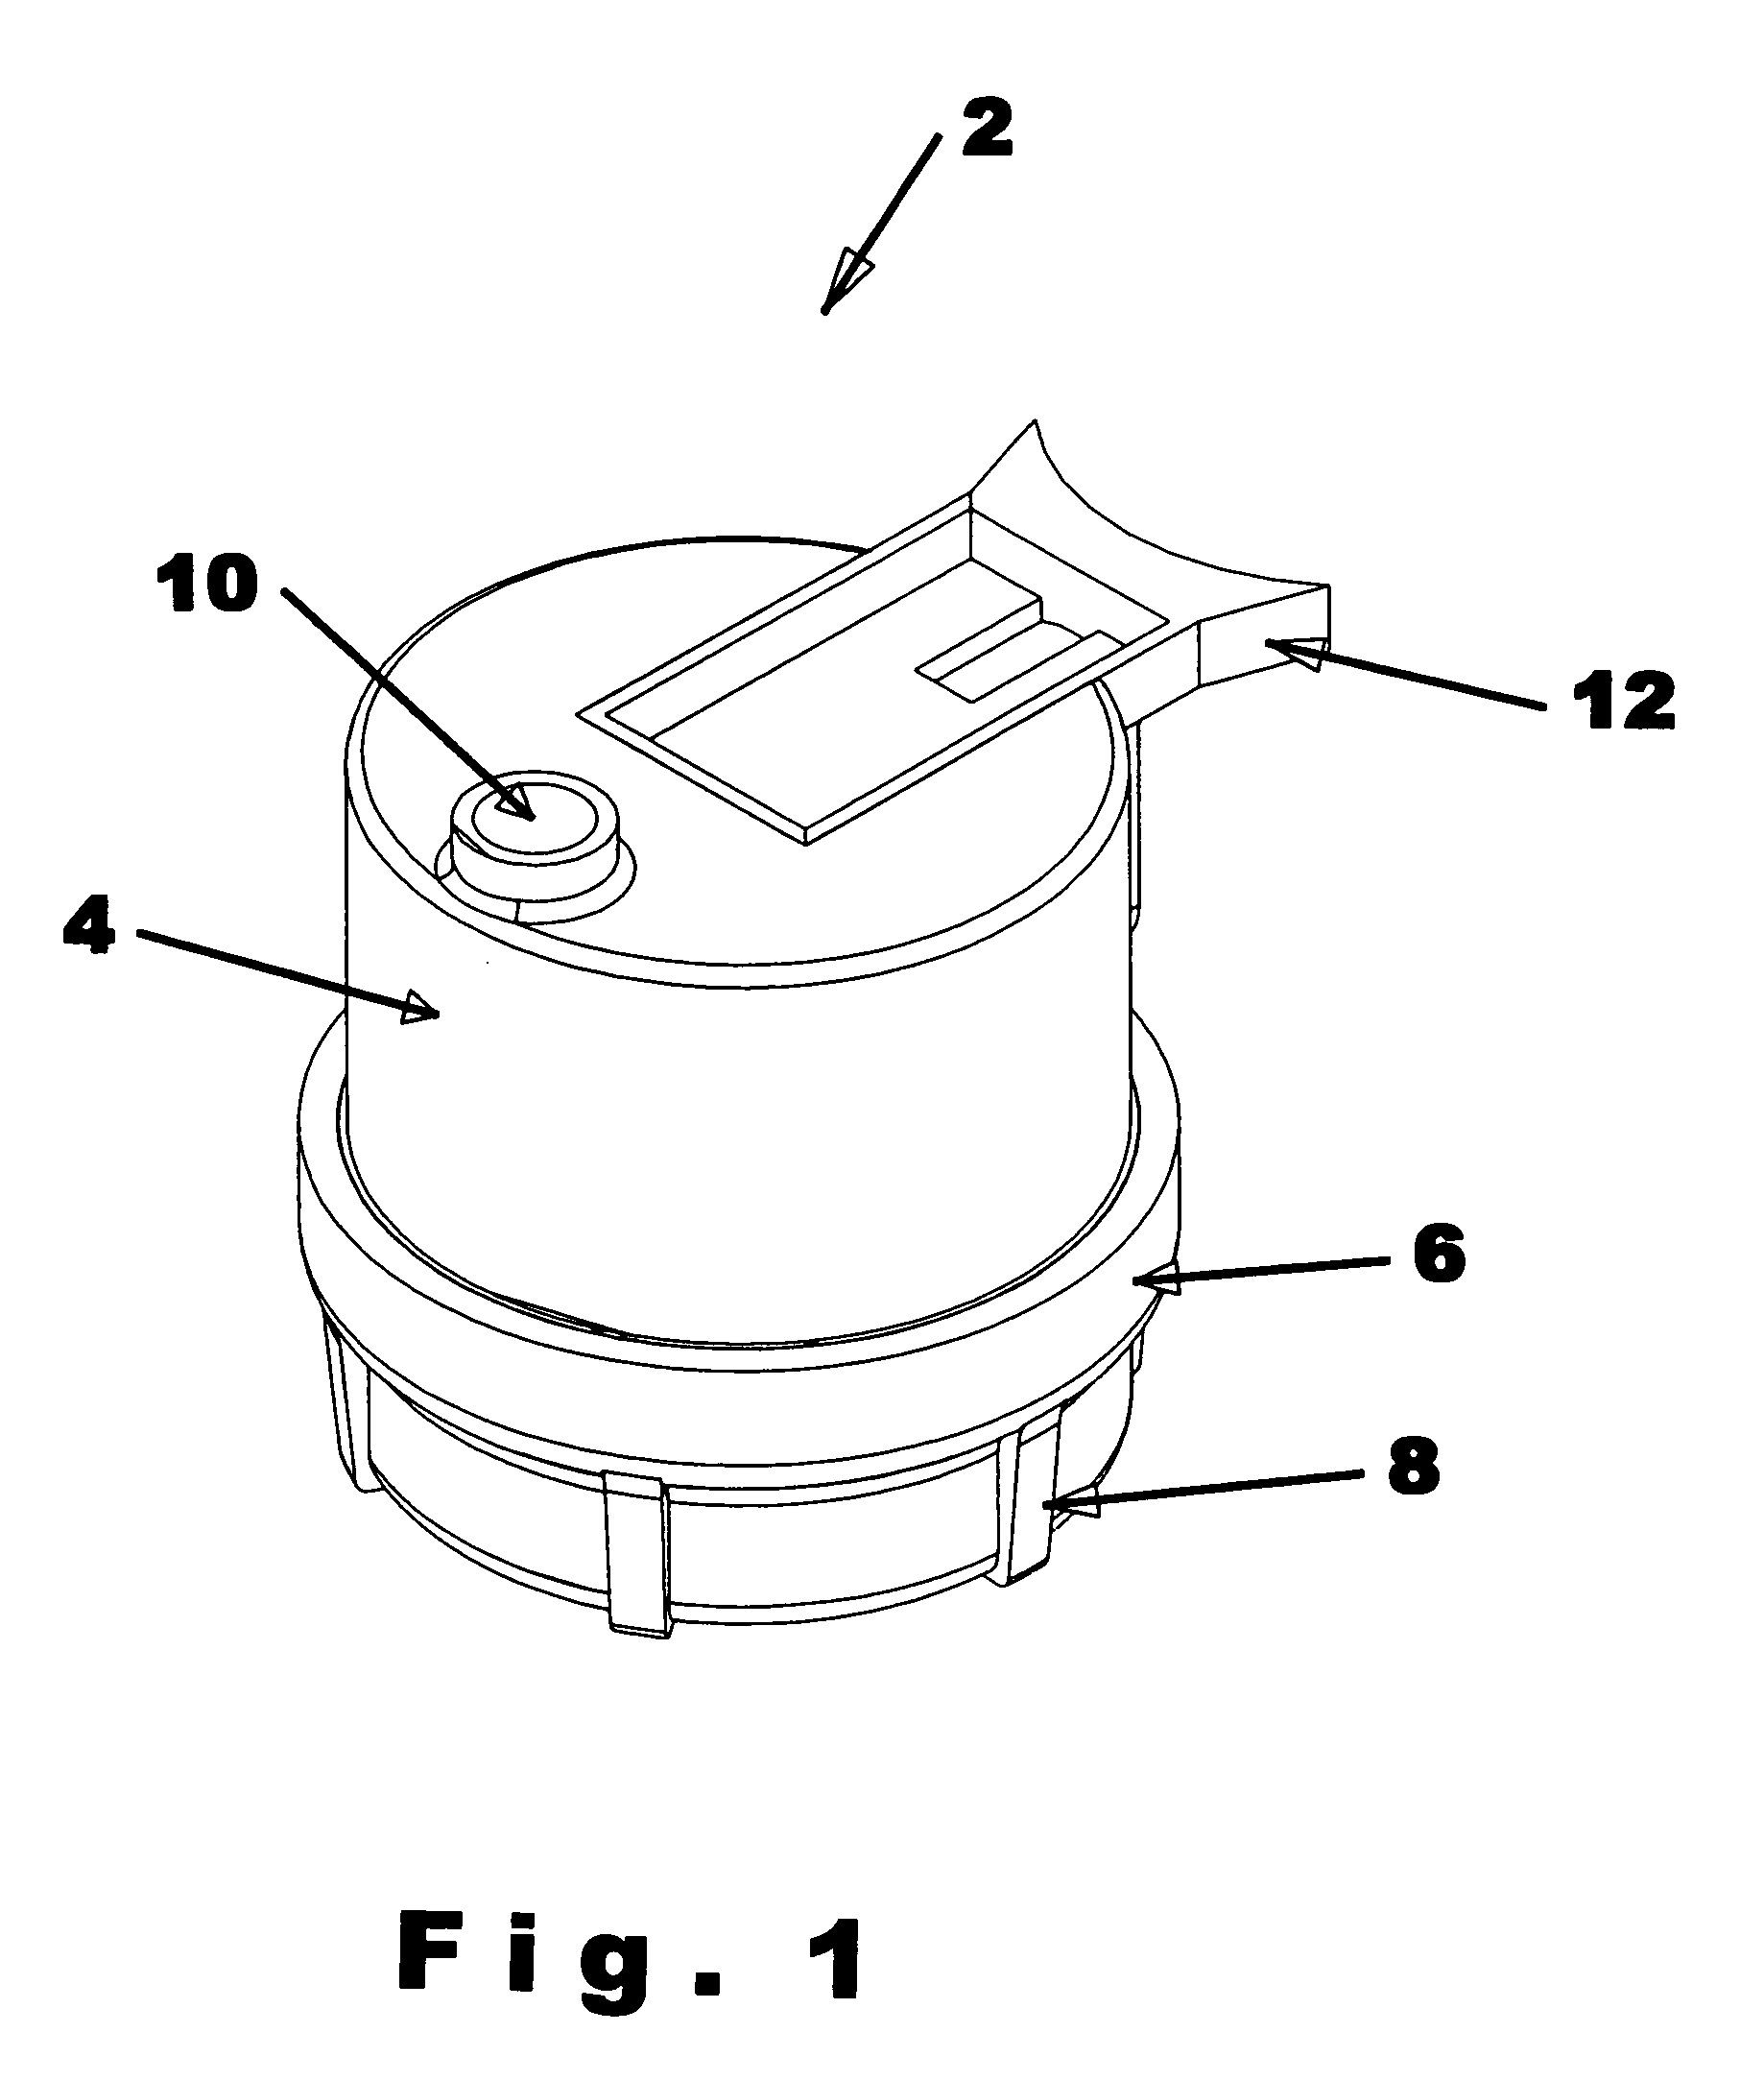 Filter assembly for gravity-assisted air conditioner discharge water saver systems